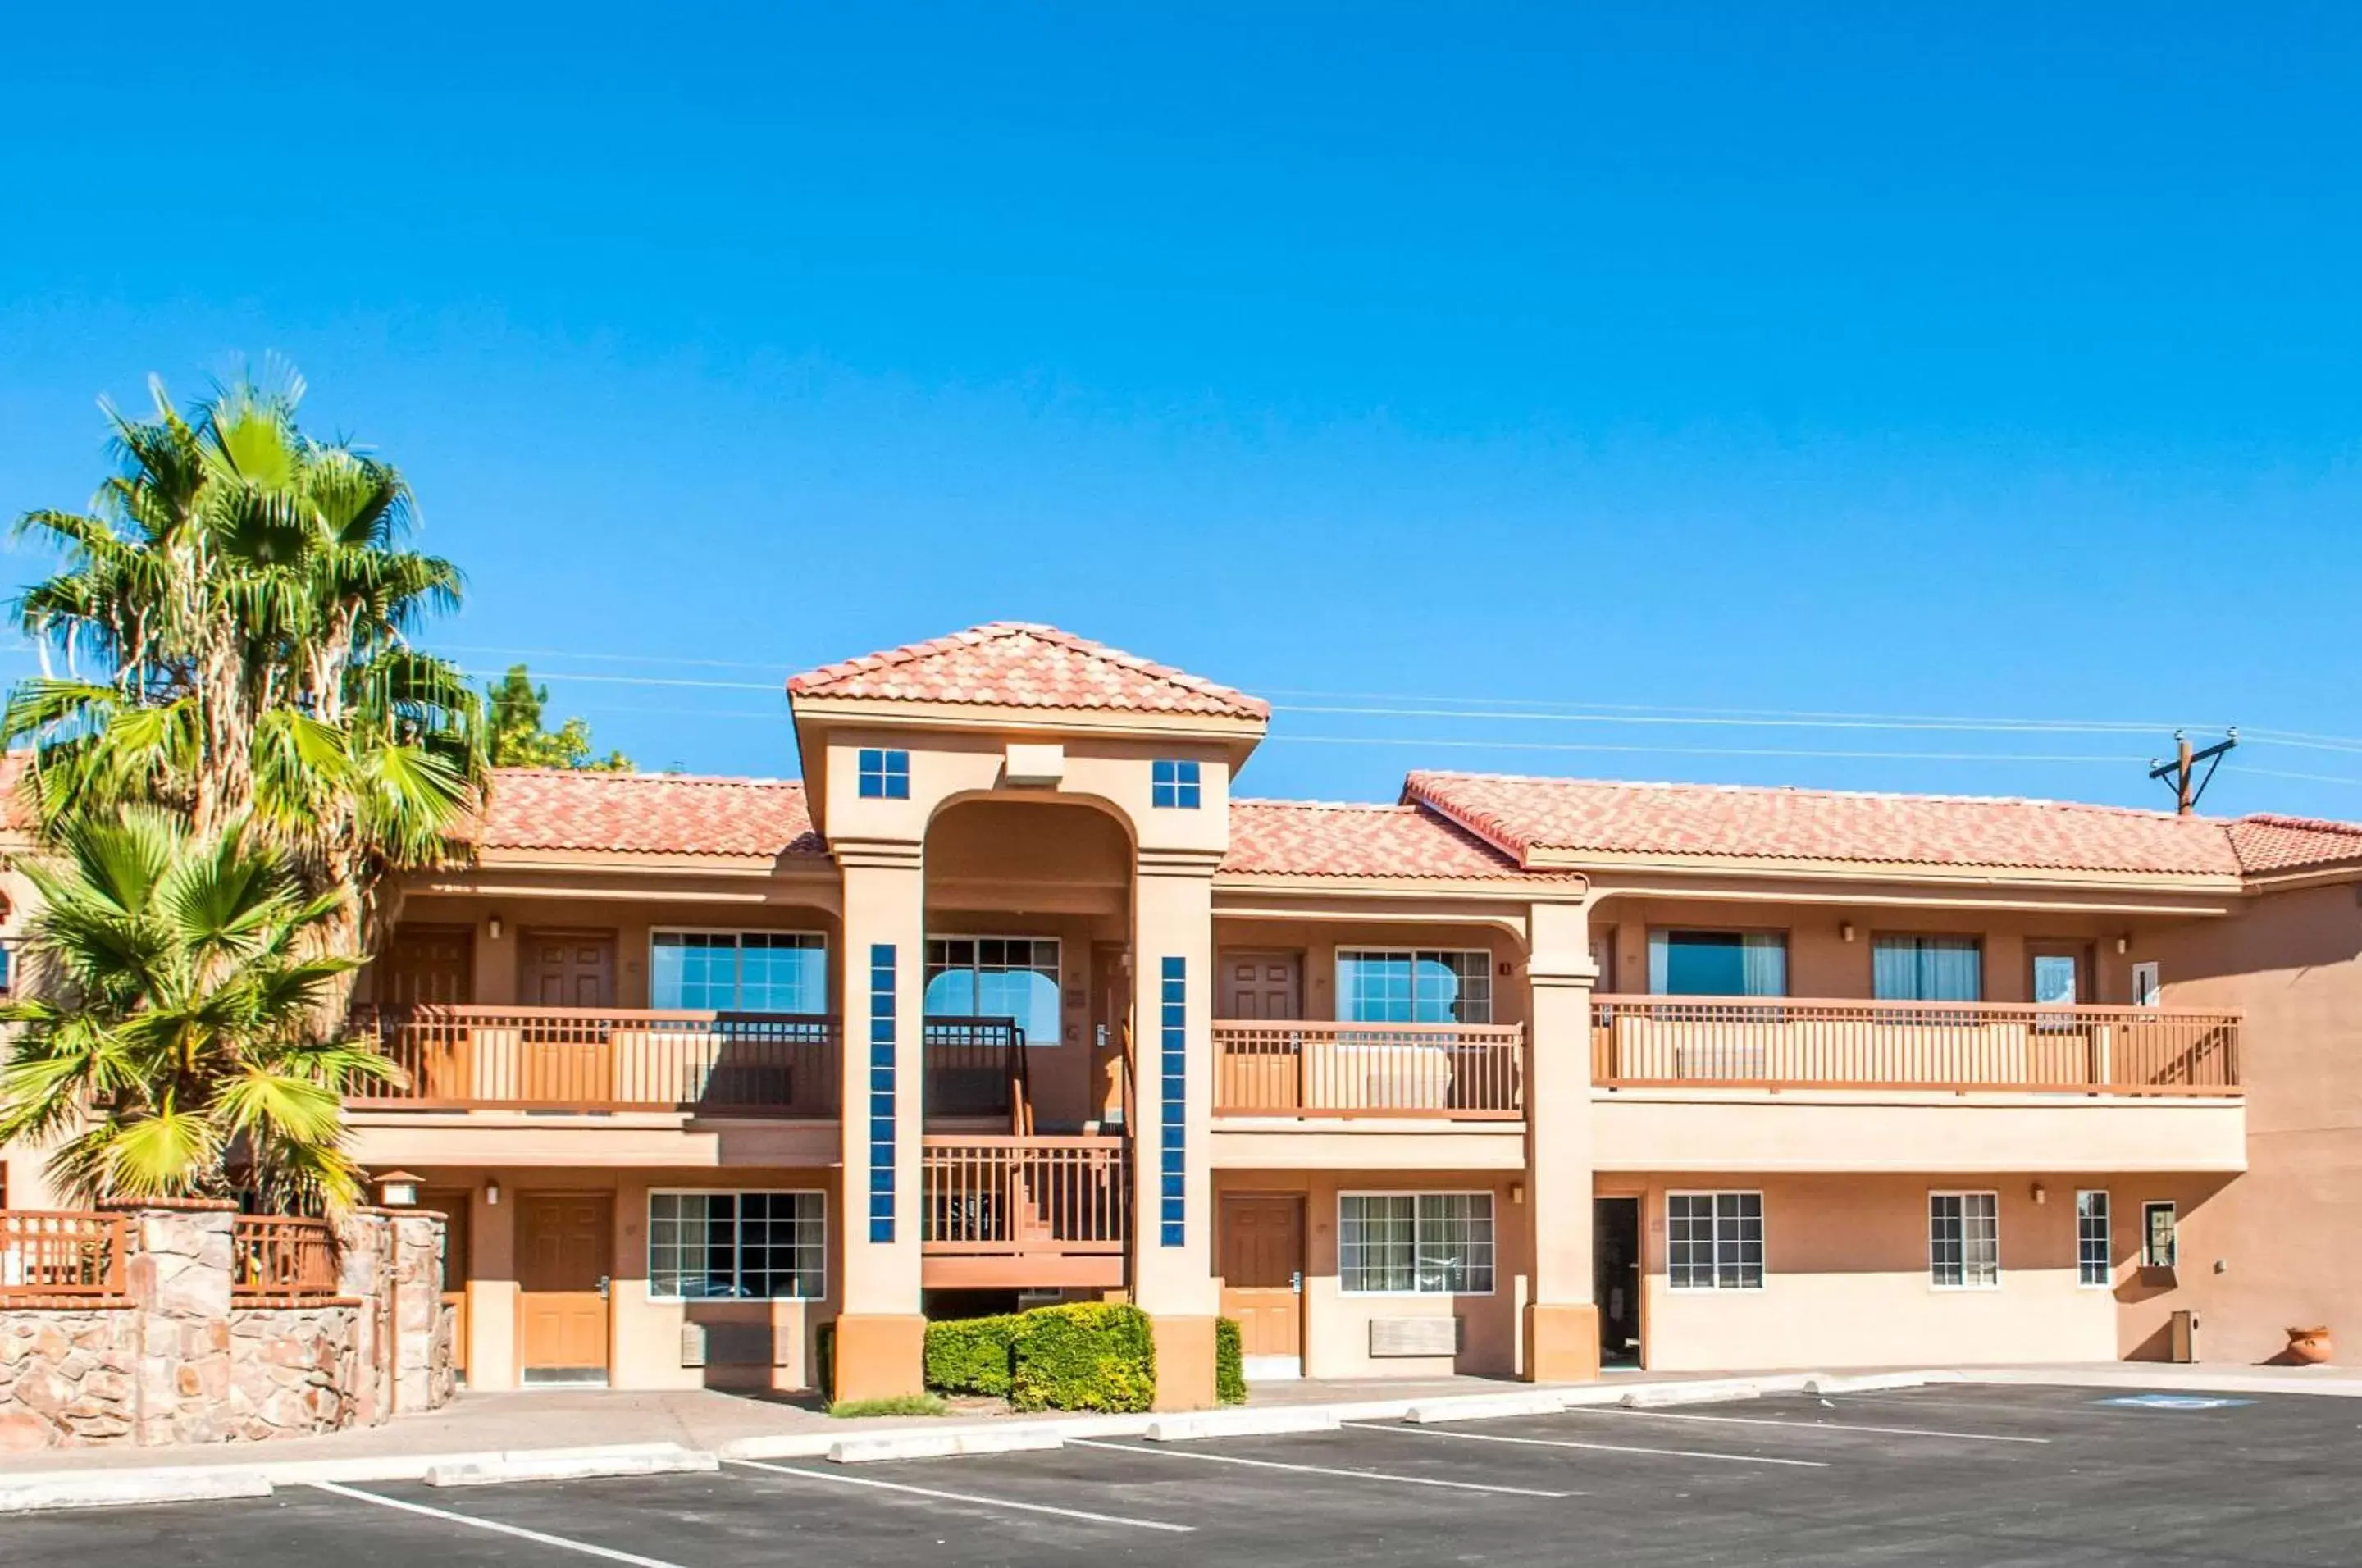 Property Building in Quality Inn & Suites Las Cruces - University Area